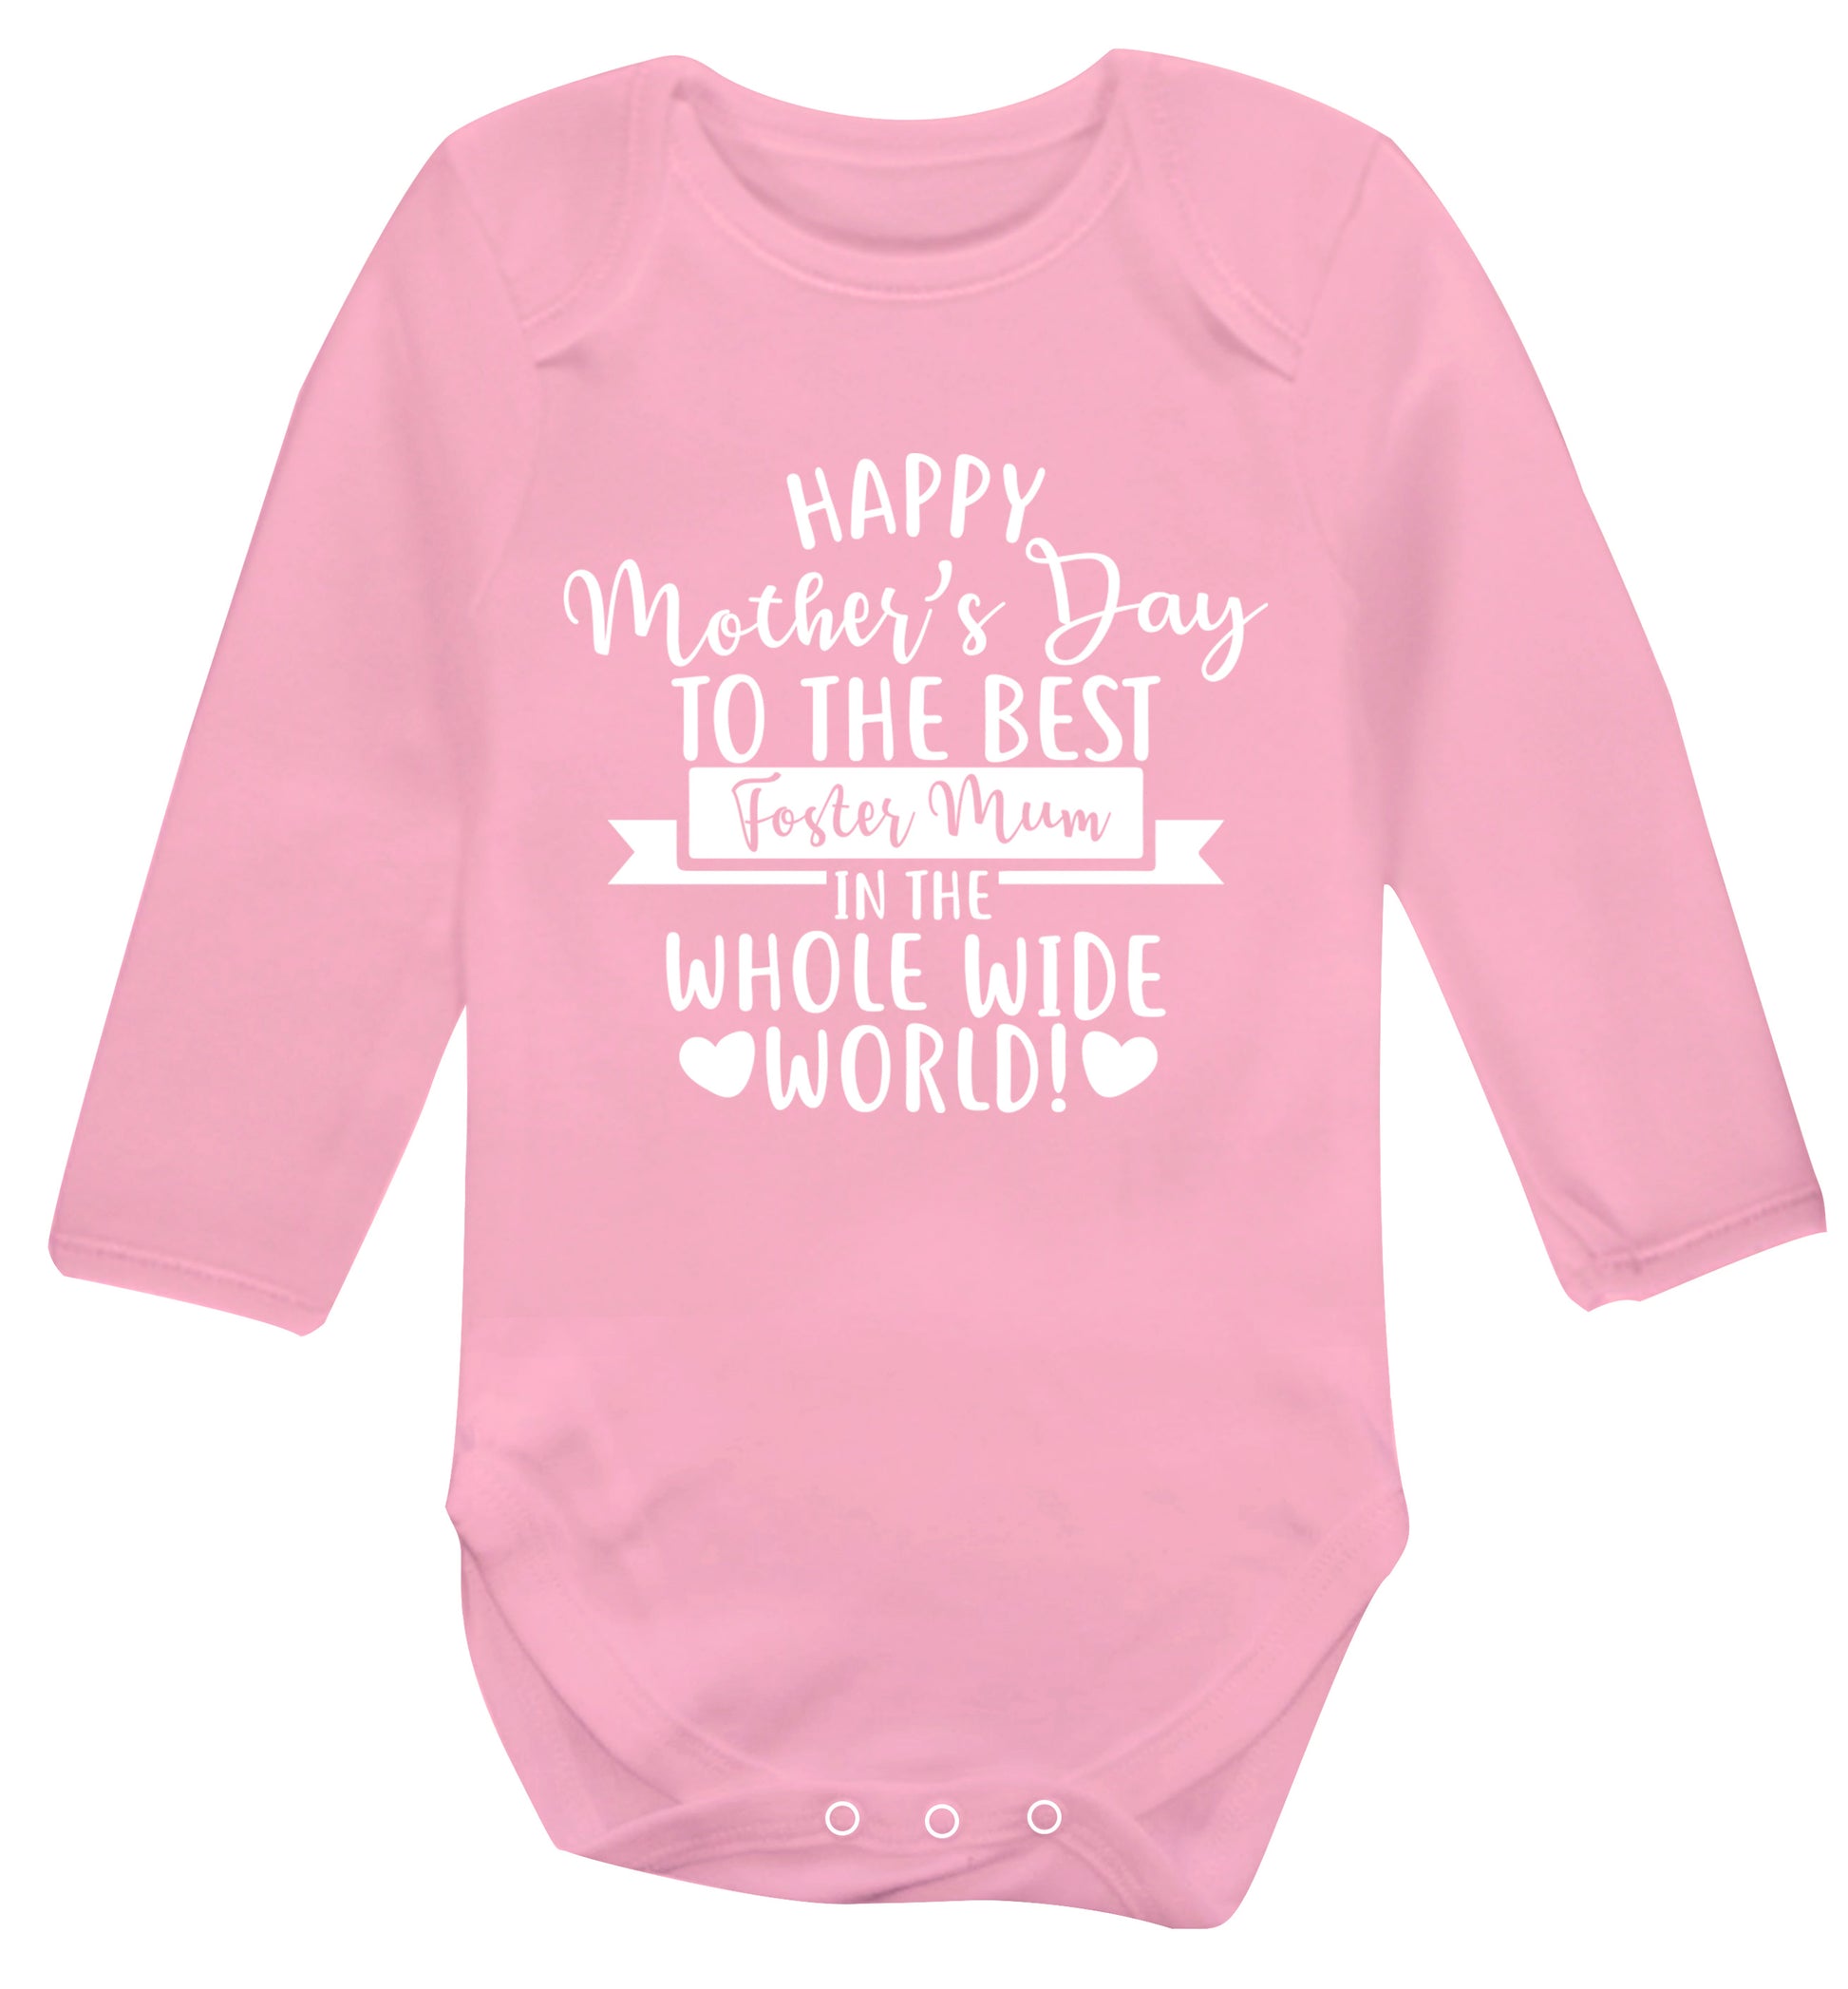 Happy mother's day to the best foster mum in the world Baby Vest long sleeved pale pink 6-12 months